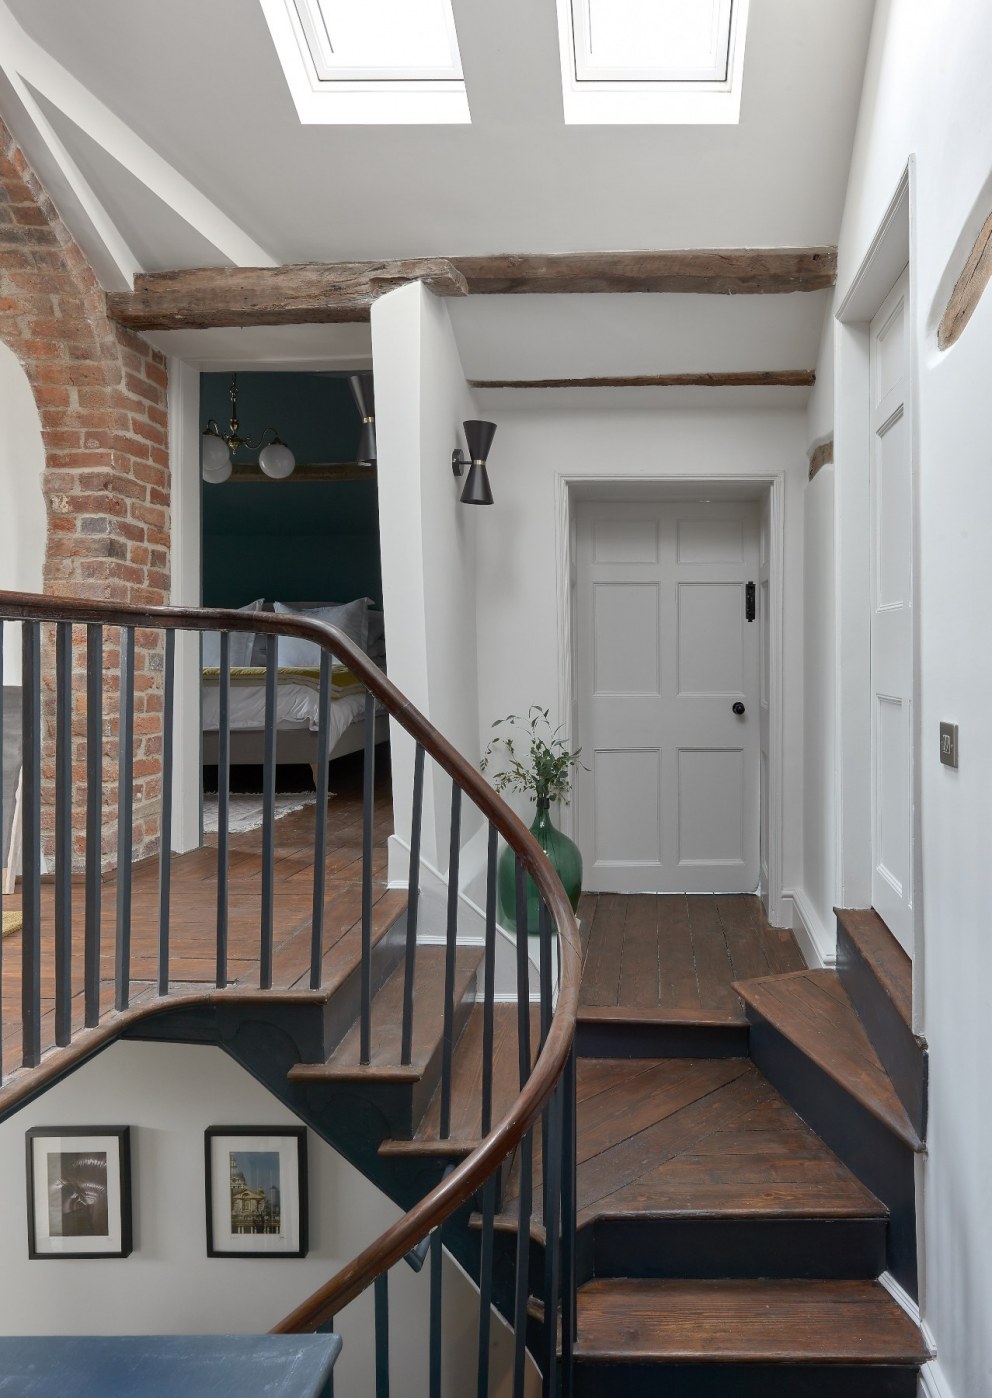 Welsh Farmhouse renovation | Original staircase in Victorian Cottage | Interior Designers